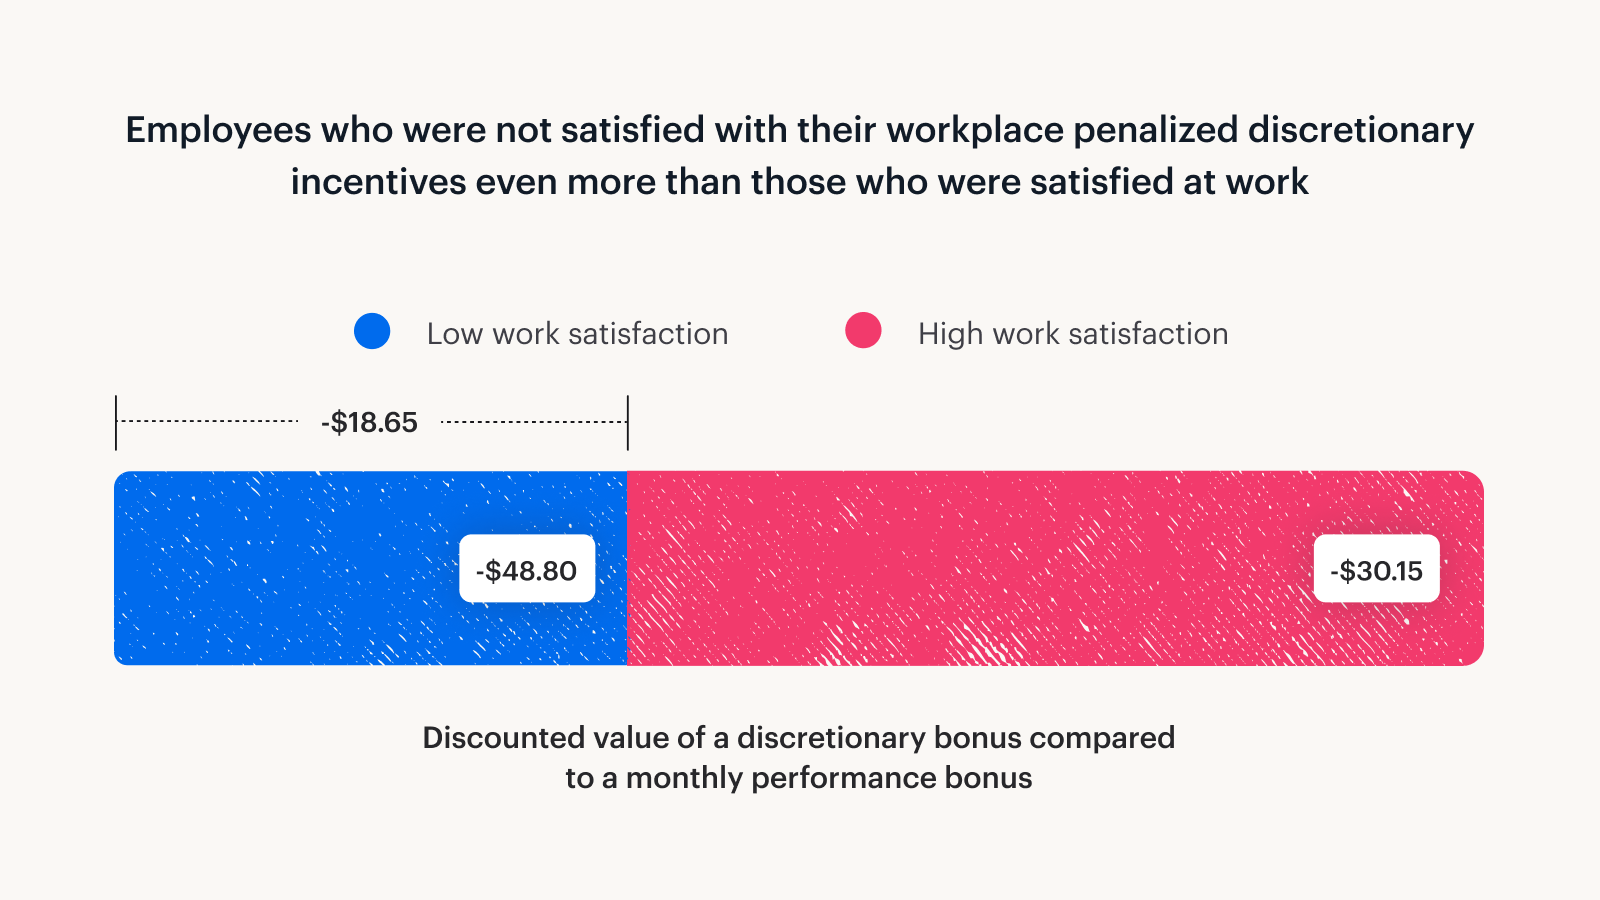 A graph showing employees who are not satisfied with their workplace penalize discretionary incentives more than those who are satisfied at work.